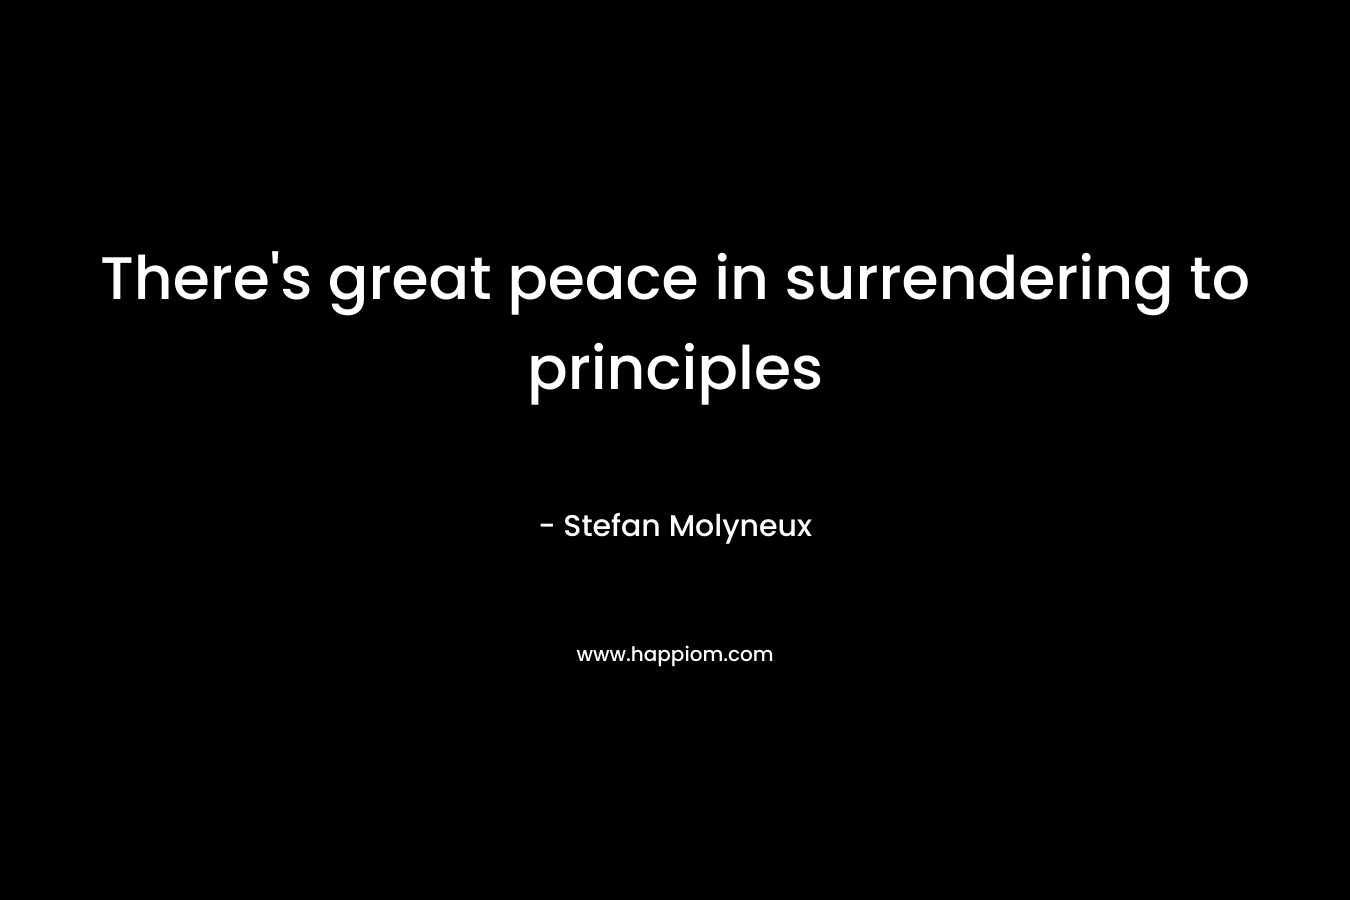 There's great peace in surrendering to principles